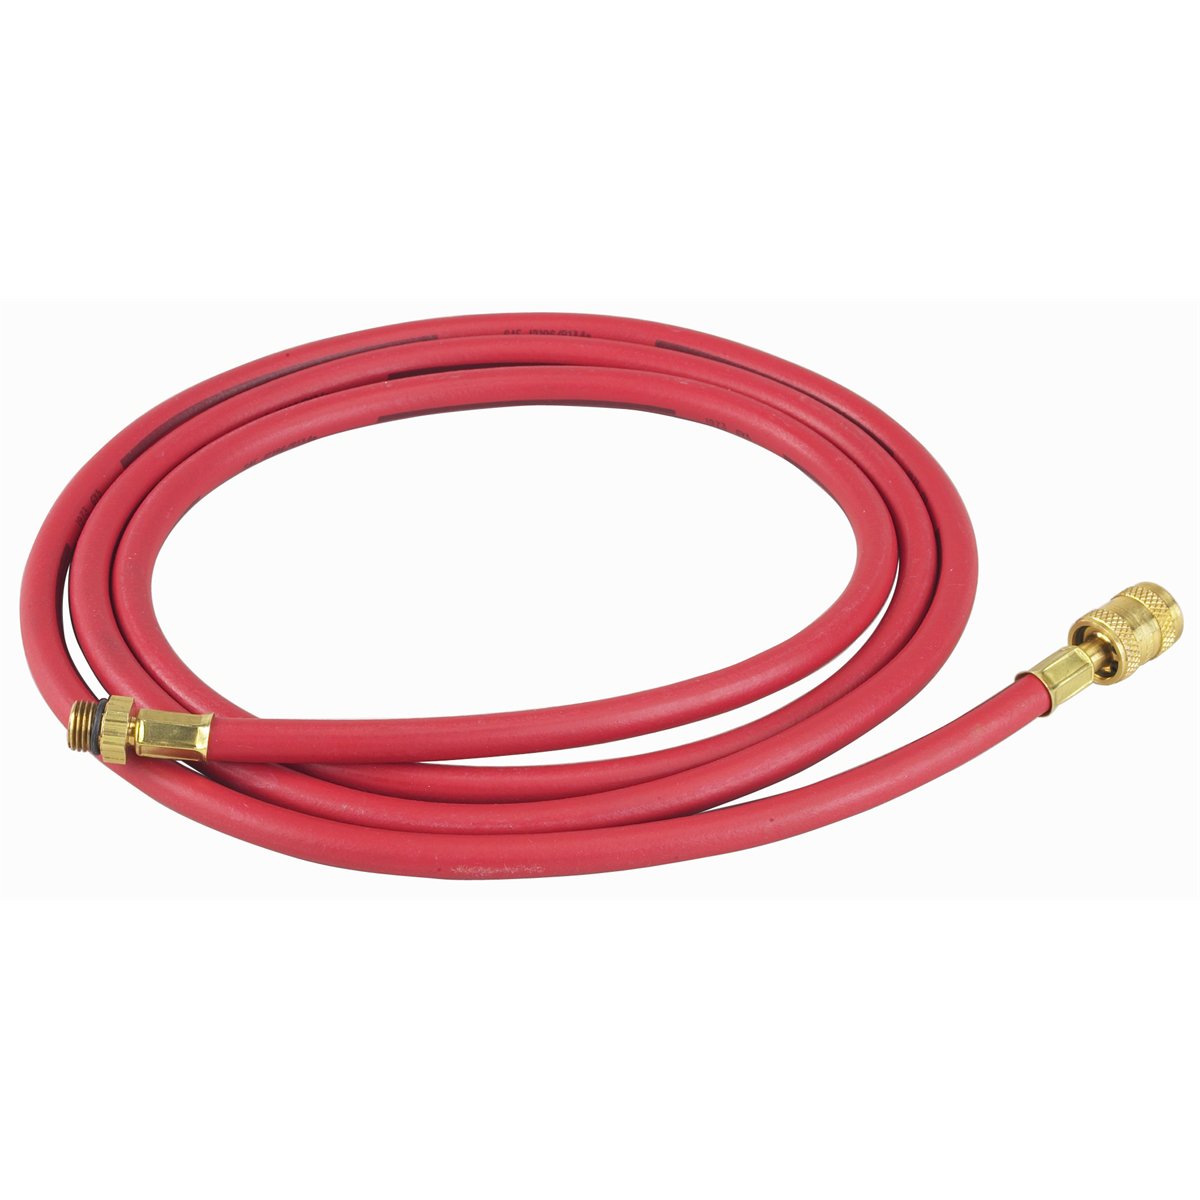 Replacement 96 Inch Red Hose w ACME Fittings for 12134A Series